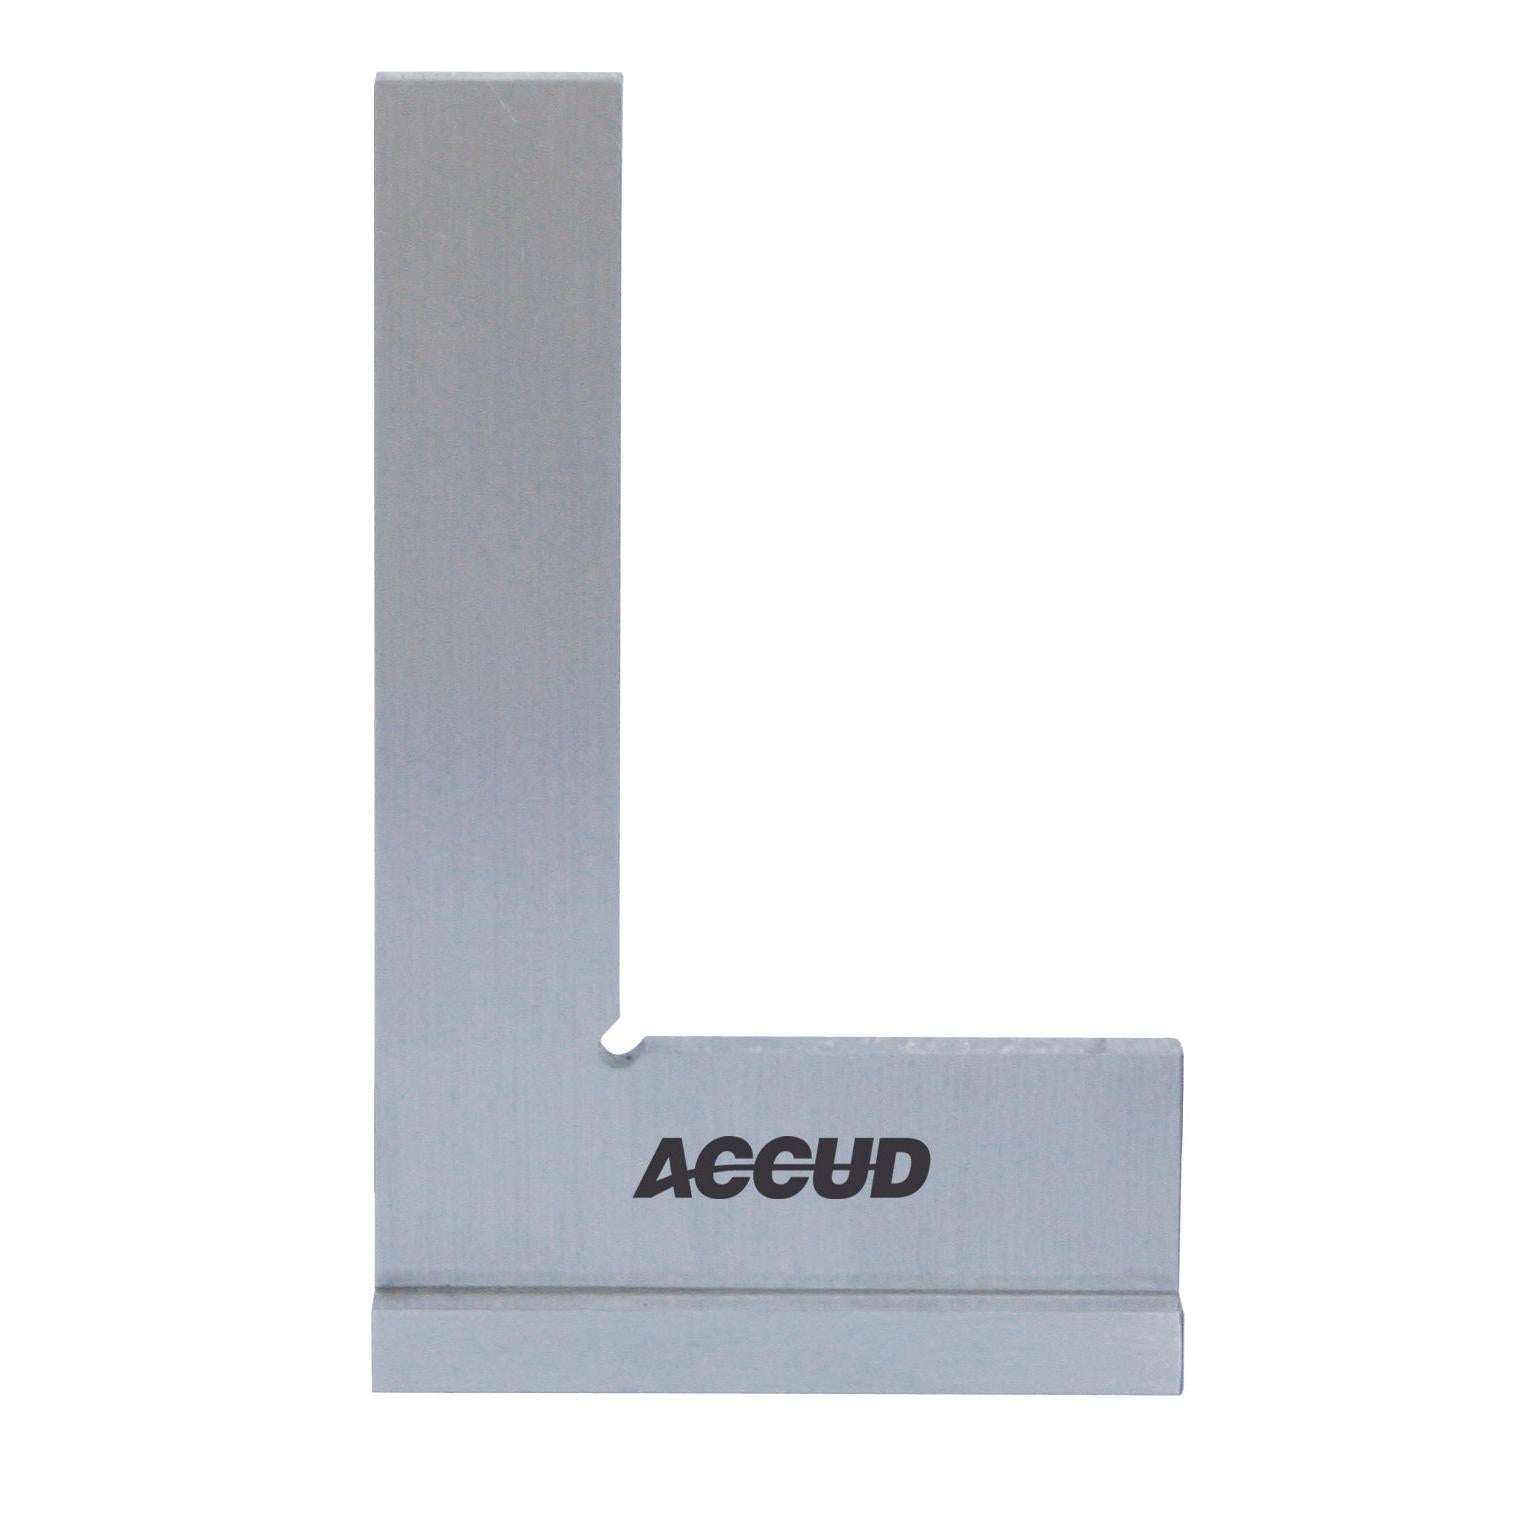 ACCUD | Flat Edge Square 100X70Mm | 842-004-10 Power Tool Services